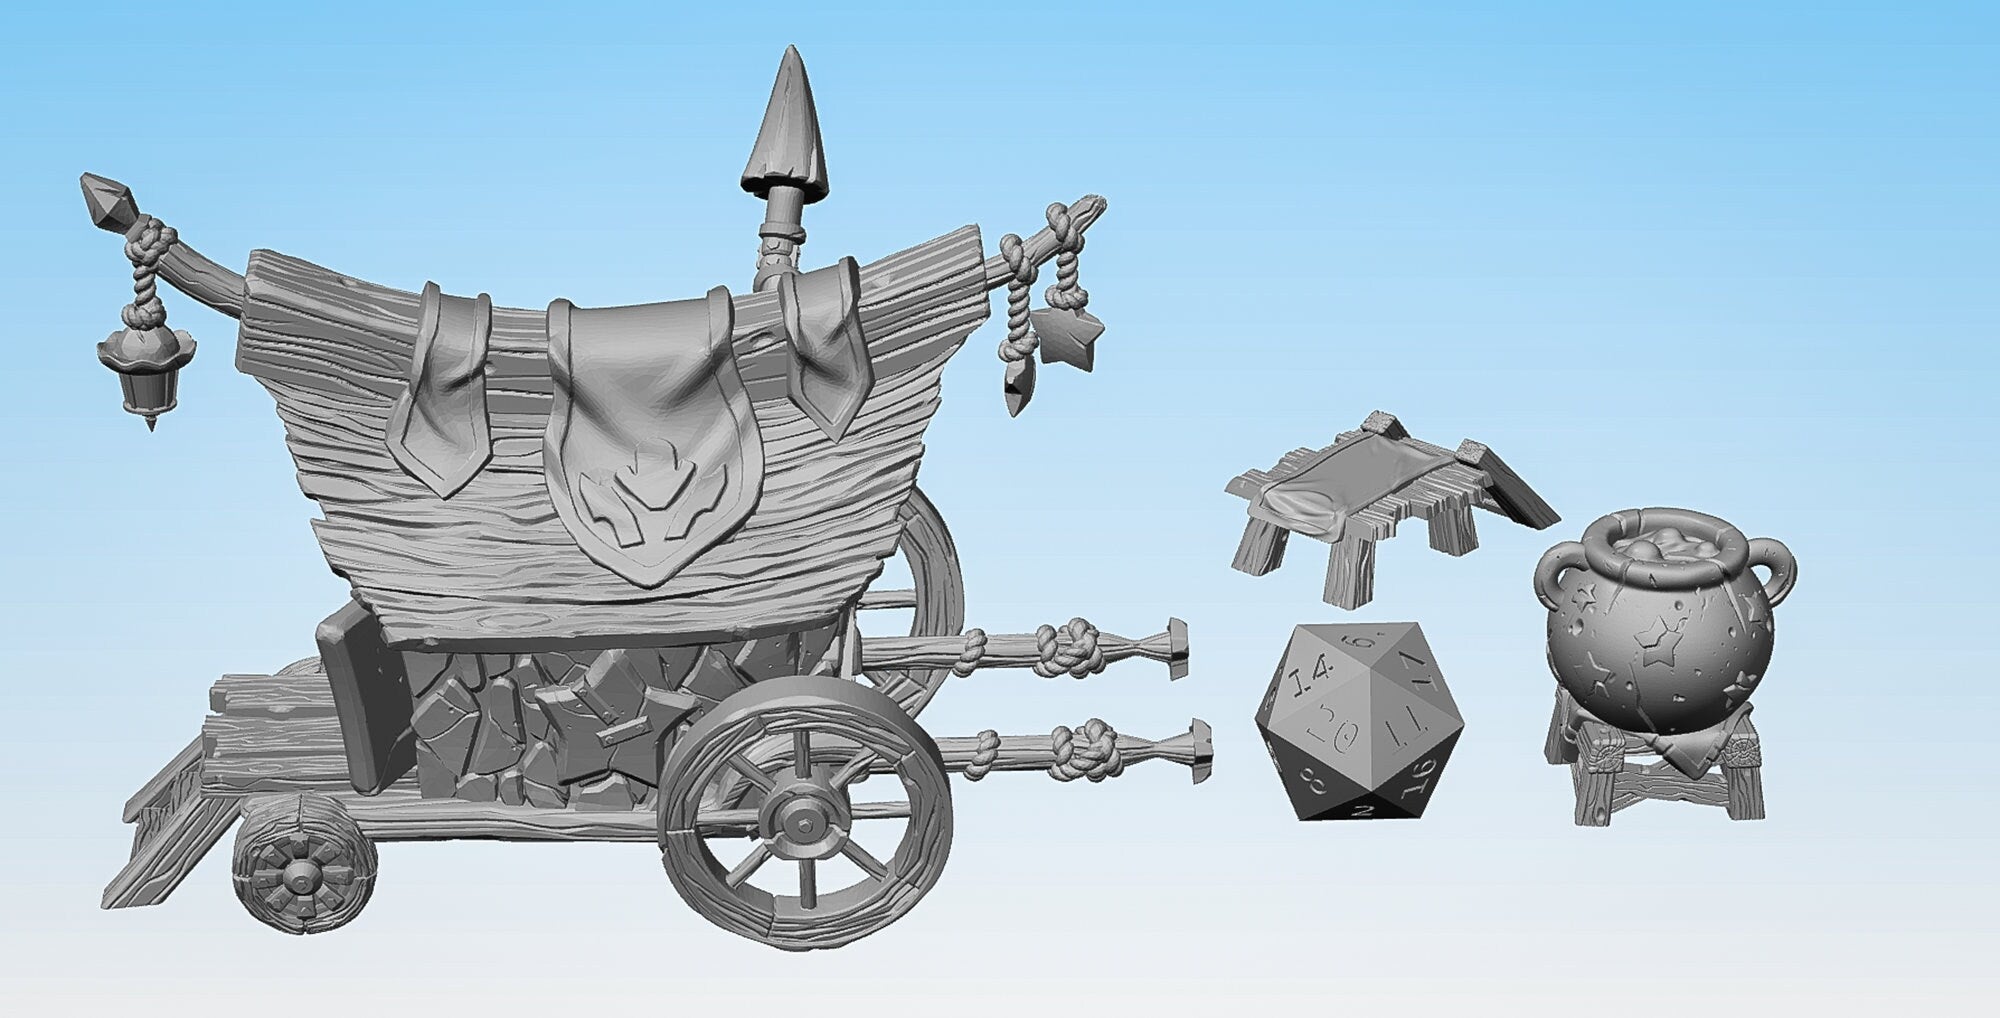 CART + Additions "Qimmi's Cart" | Dungeons and Dragons | DnD | Pathfinder | Tabletop | RPG | Hero Size | 28 mm-Role Playing Miniatures